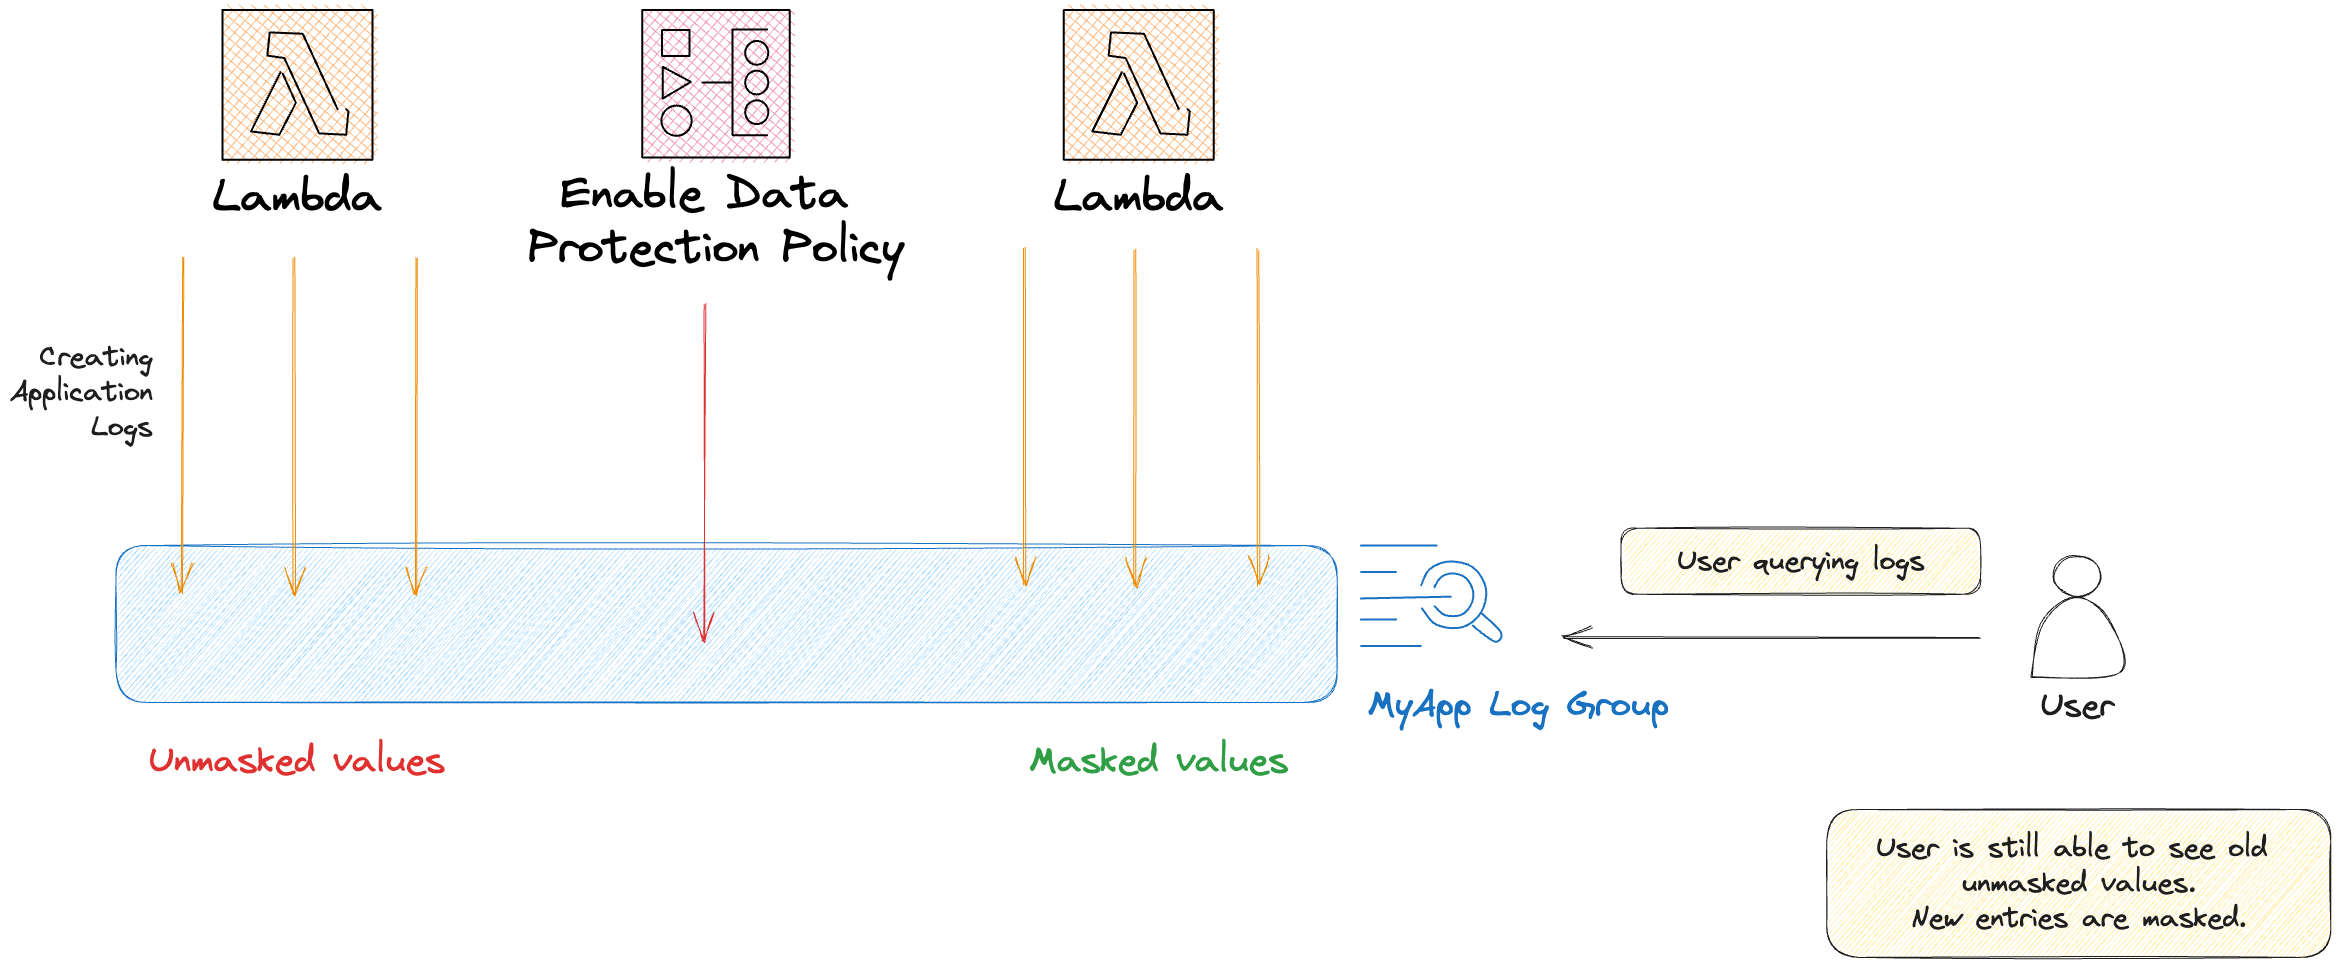 Diagram showing a timeline of log generation by AWS Lambda in the log group MyApp. Data protection policy is enabled in the middle of the timeline. When an user query the log group, they will be able to see old unmasked values. New entries are masked.